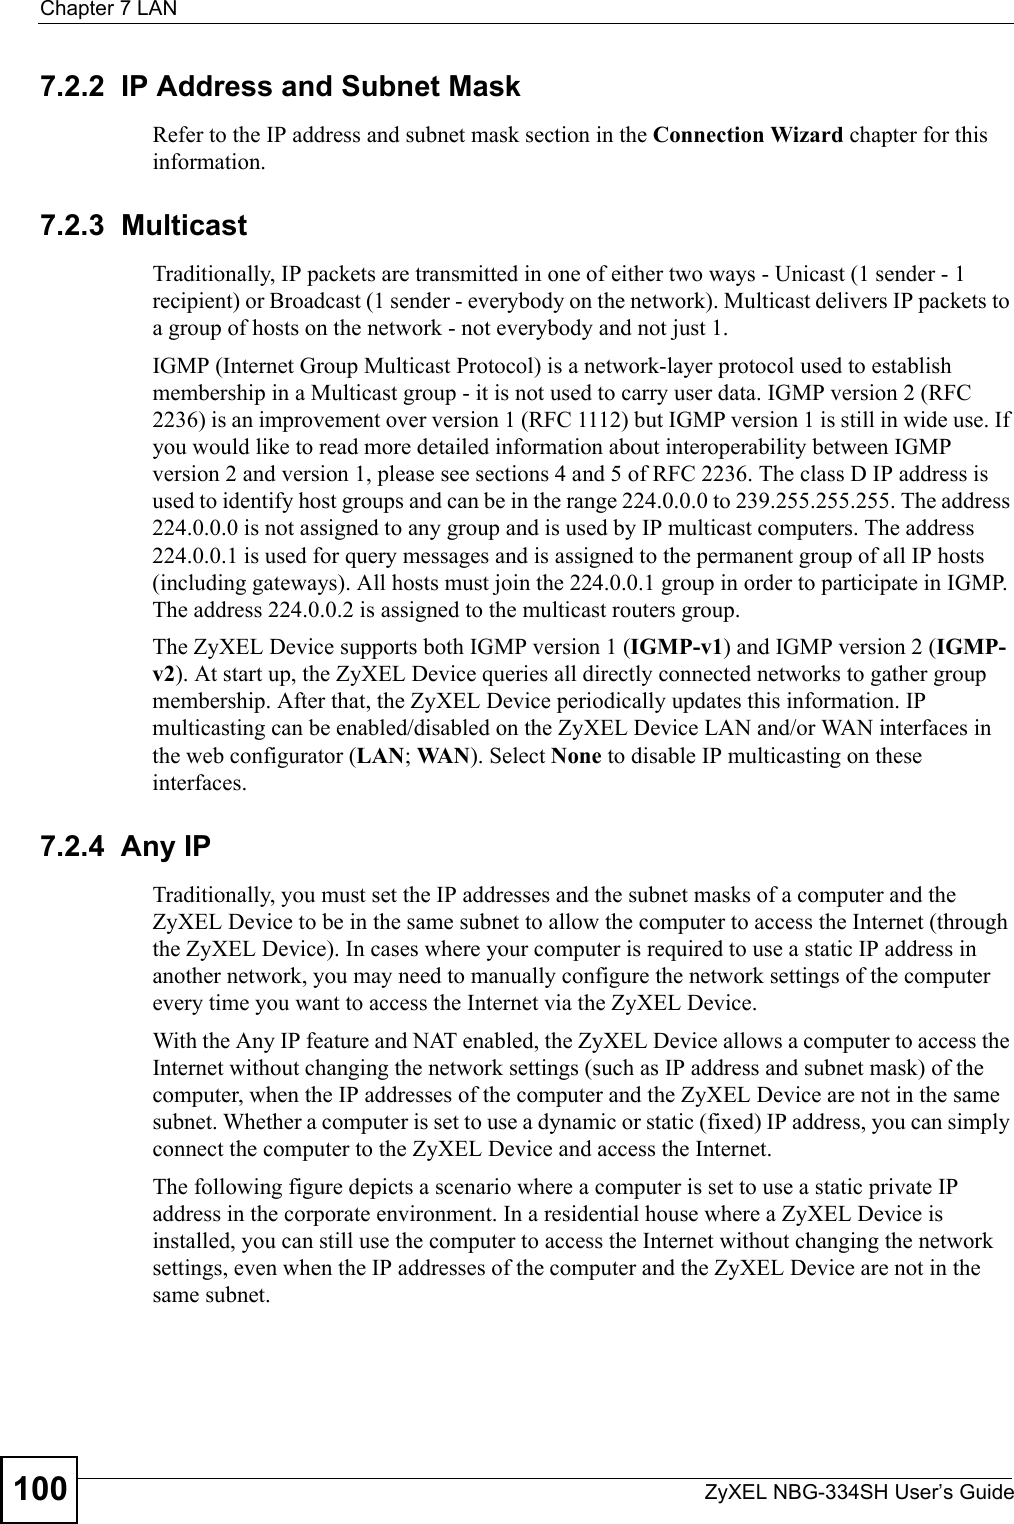 Chapter 7 LANZyXEL NBG-334SH User’s Guide1007.2.2  IP Address and Subnet MaskRefer to the IP address and subnet mask section in the Connection Wizard chapter for this information.7.2.3  MulticastTraditionally, IP packets are transmitted in one of either two ways - Unicast (1 sender - 1 recipient) or Broadcast (1 sender - everybody on the network). Multicast delivers IP packets to a group of hosts on the network - not everybody and not just 1. IGMP (Internet Group Multicast Protocol) is a network-layer protocol used to establish membership in a Multicast group - it is not used to carry user data. IGMP version 2 (RFC 2236) is an improvement over version 1 (RFC 1112) but IGMP version 1 is still in wide use. If you would like to read more detailed information about interoperability between IGMP version 2 and version 1, please see sections 4 and 5 of RFC 2236. The class D IP address is used to identify host groups and can be in the range 224.0.0.0 to 239.255.255.255. The address 224.0.0.0 is not assigned to any group and is used by IP multicast computers. The address 224.0.0.1 is used for query messages and is assigned to the permanent group of all IP hosts (including gateways). All hosts must join the 224.0.0.1 group in order to participate in IGMP. The address 224.0.0.2 is assigned to the multicast routers group. The ZyXEL Device supports both IGMP version 1 (IGMP-v1) and IGMP version 2 (IGMP-v2). At start up, the ZyXEL Device queries all directly connected networks to gather group membership. After that, the ZyXEL Device periodically updates this information. IP multicasting can be enabled/disabled on the ZyXEL Device LAN and/or WAN interfaces in the web configurator (LAN; WA N ). Select None to disable IP multicasting on these interfaces.7.2.4  Any IPTraditionally, you must set the IP addresses and the subnet masks of a computer and the ZyXEL Device to be in the same subnet to allow the computer to access the Internet (through the ZyXEL Device). In cases where your computer is required to use a static IP address in another network, you may need to manually configure the network settings of the computer every time you want to access the Internet via the ZyXEL Device.With the Any IP feature and NAT enabled, the ZyXEL Device allows a computer to access the Internet without changing the network settings (such as IP address and subnet mask) of the computer, when the IP addresses of the computer and the ZyXEL Device are not in the same subnet. Whether a computer is set to use a dynamic or static (fixed) IP address, you can simply connect the computer to the ZyXEL Device and access the Internet.The following figure depicts a scenario where a computer is set to use a static private IP address in the corporate environment. In a residential house where a ZyXEL Device is installed, you can still use the computer to access the Internet without changing the network settings, even when the IP addresses of the computer and the ZyXEL Device are not in the same subnet. 